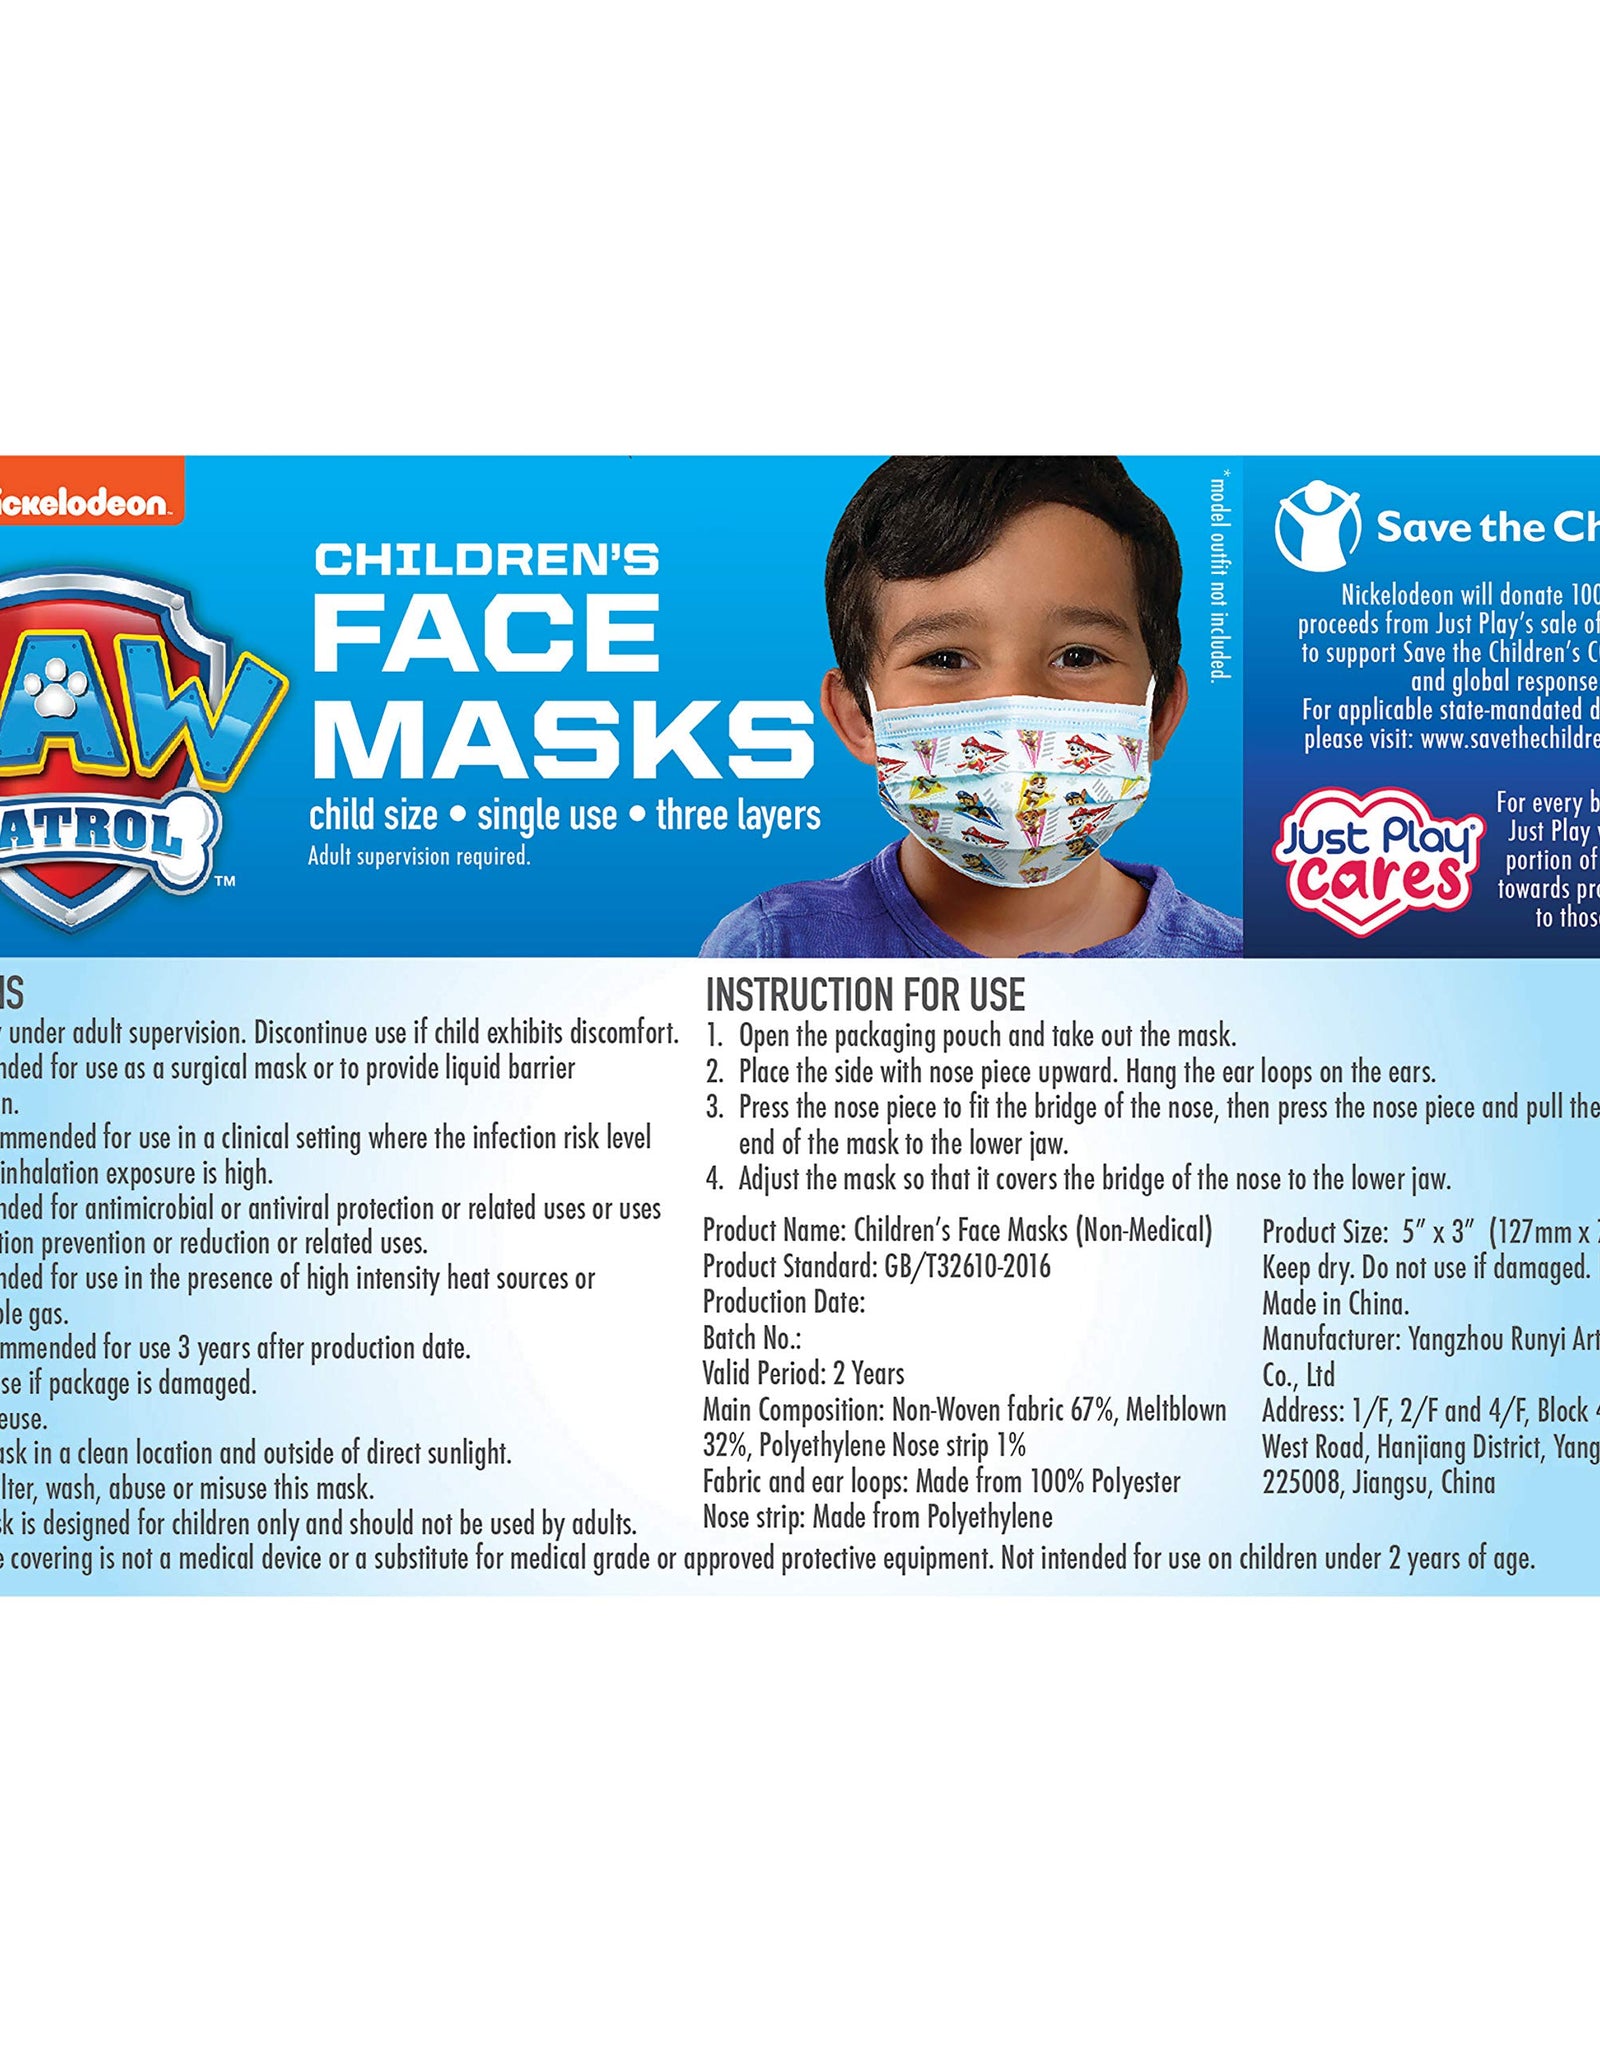 Just Play Children’s Single Use Face Mask, Paw Patrol, 14 Count, Small, Ages 2-7